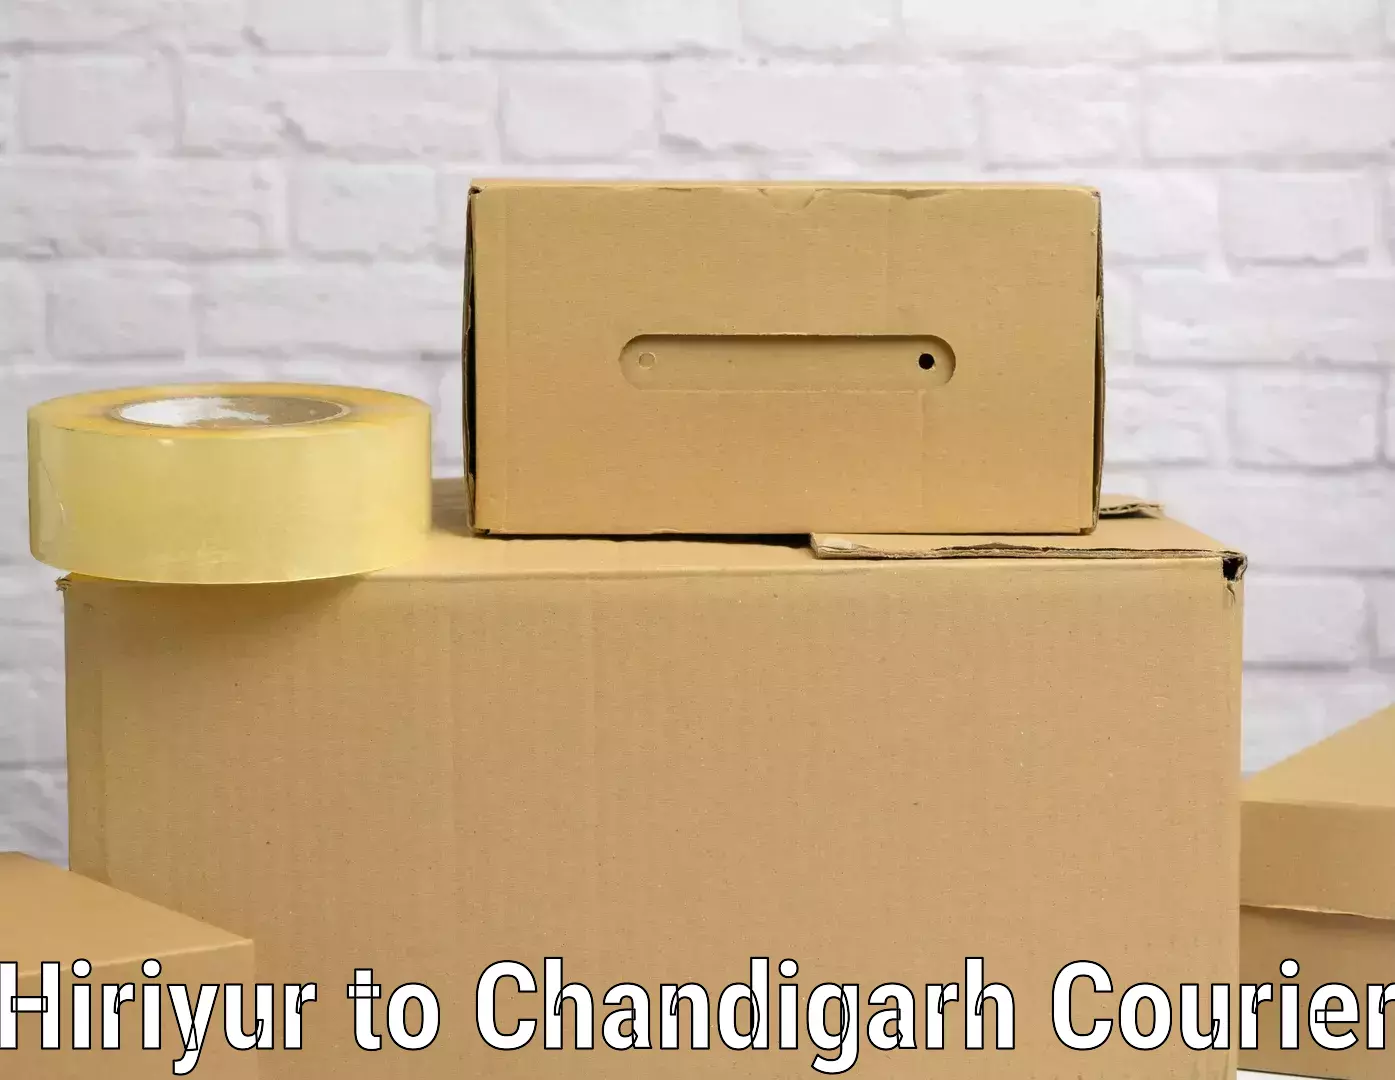 Luggage delivery network Hiriyur to Chandigarh